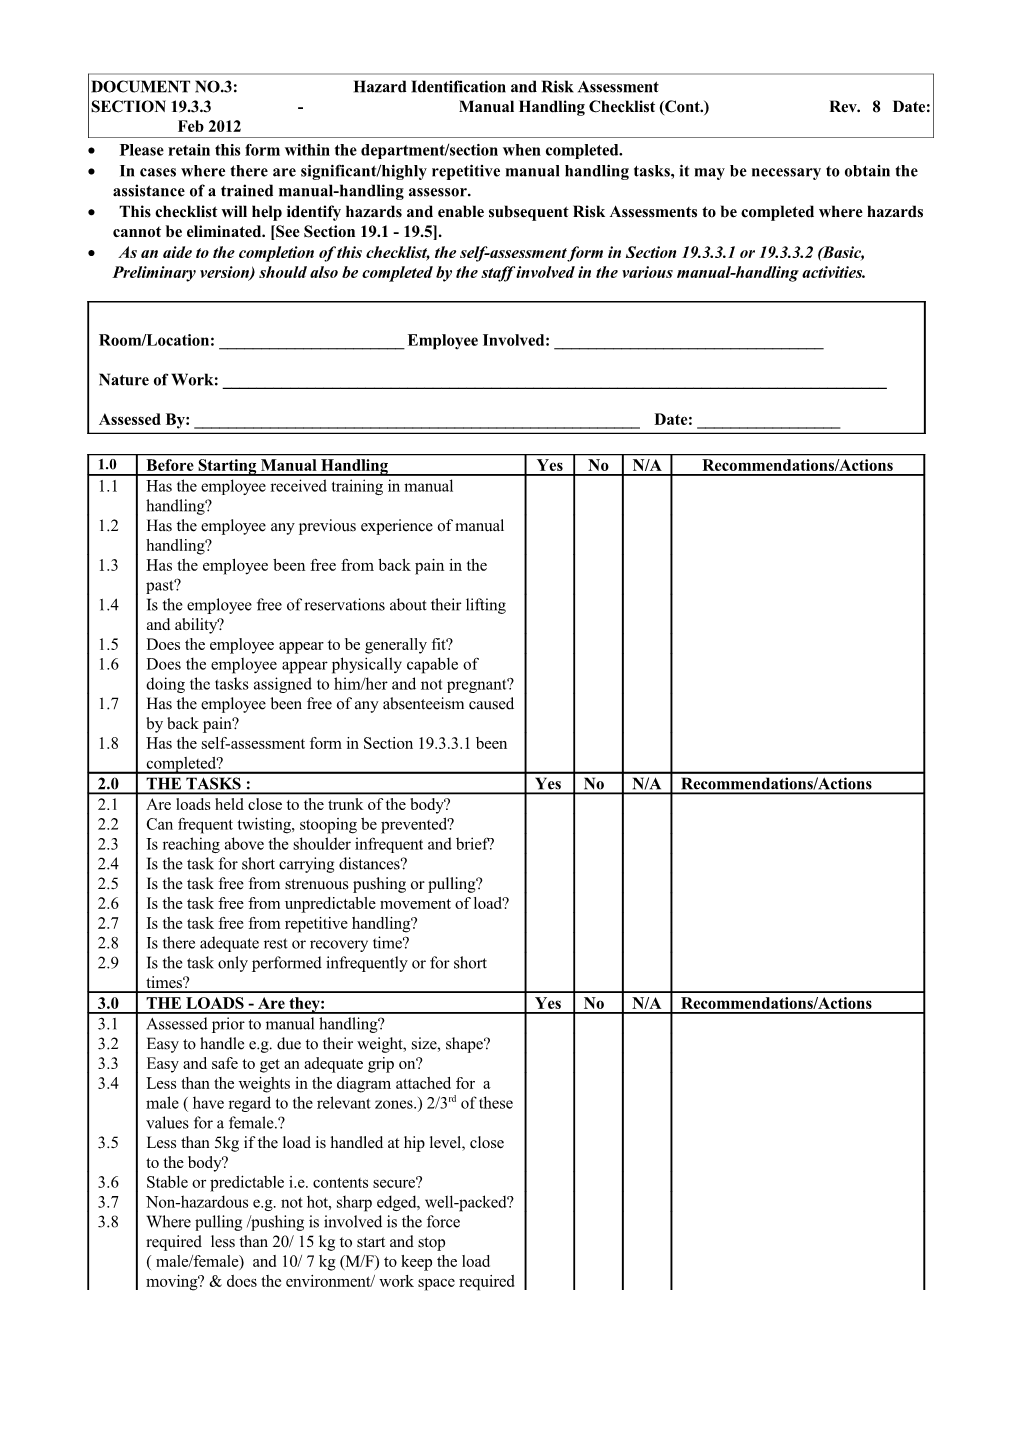 Please Retain This Form Within the Department/Section When Completed